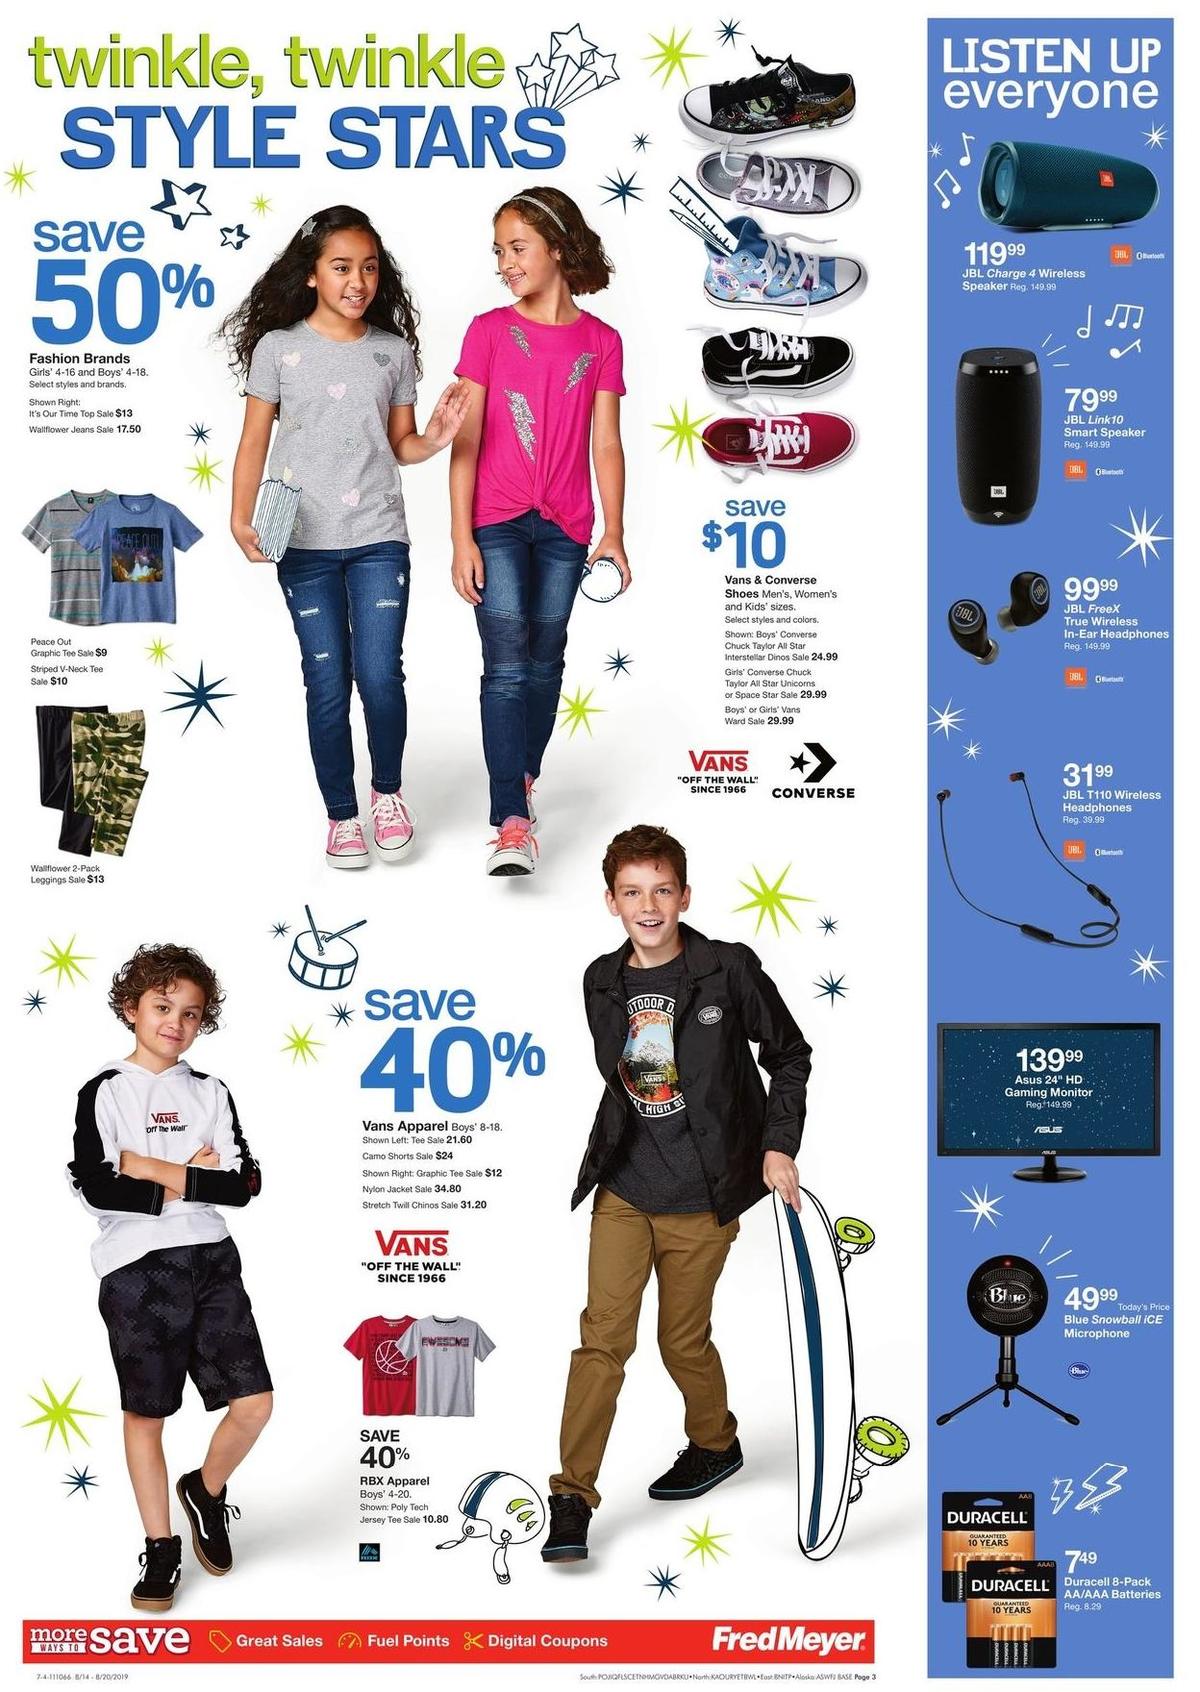 Fred Meyer Back to School Weekly Ad from August 14